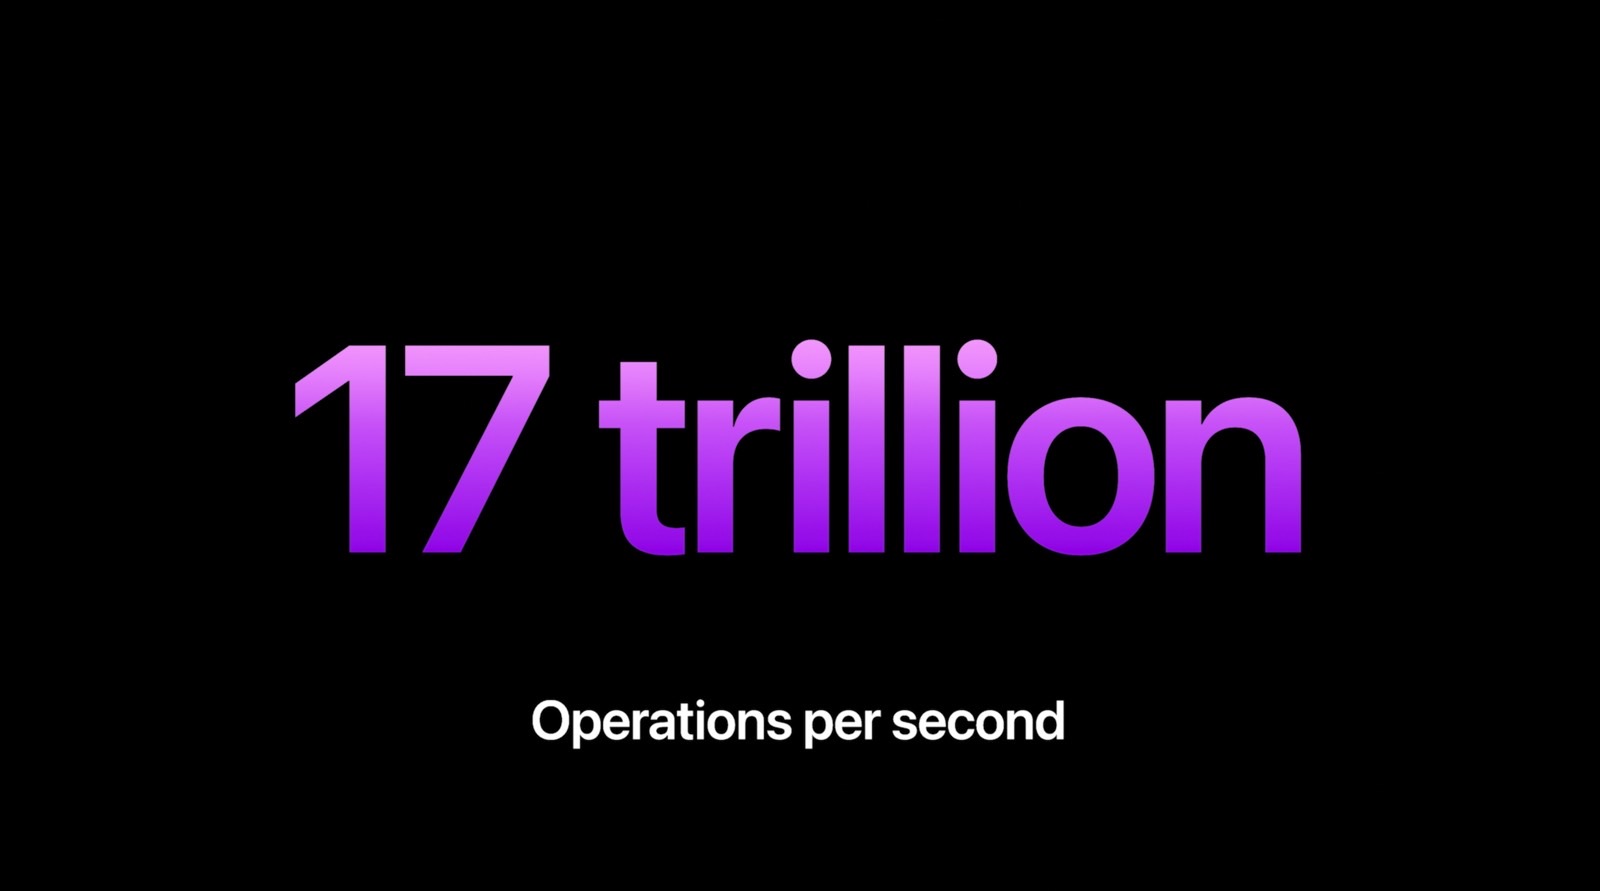 The Neural Engine in the iPhone 14 Pro's A16 chip tops at 17 trillion operations per second.